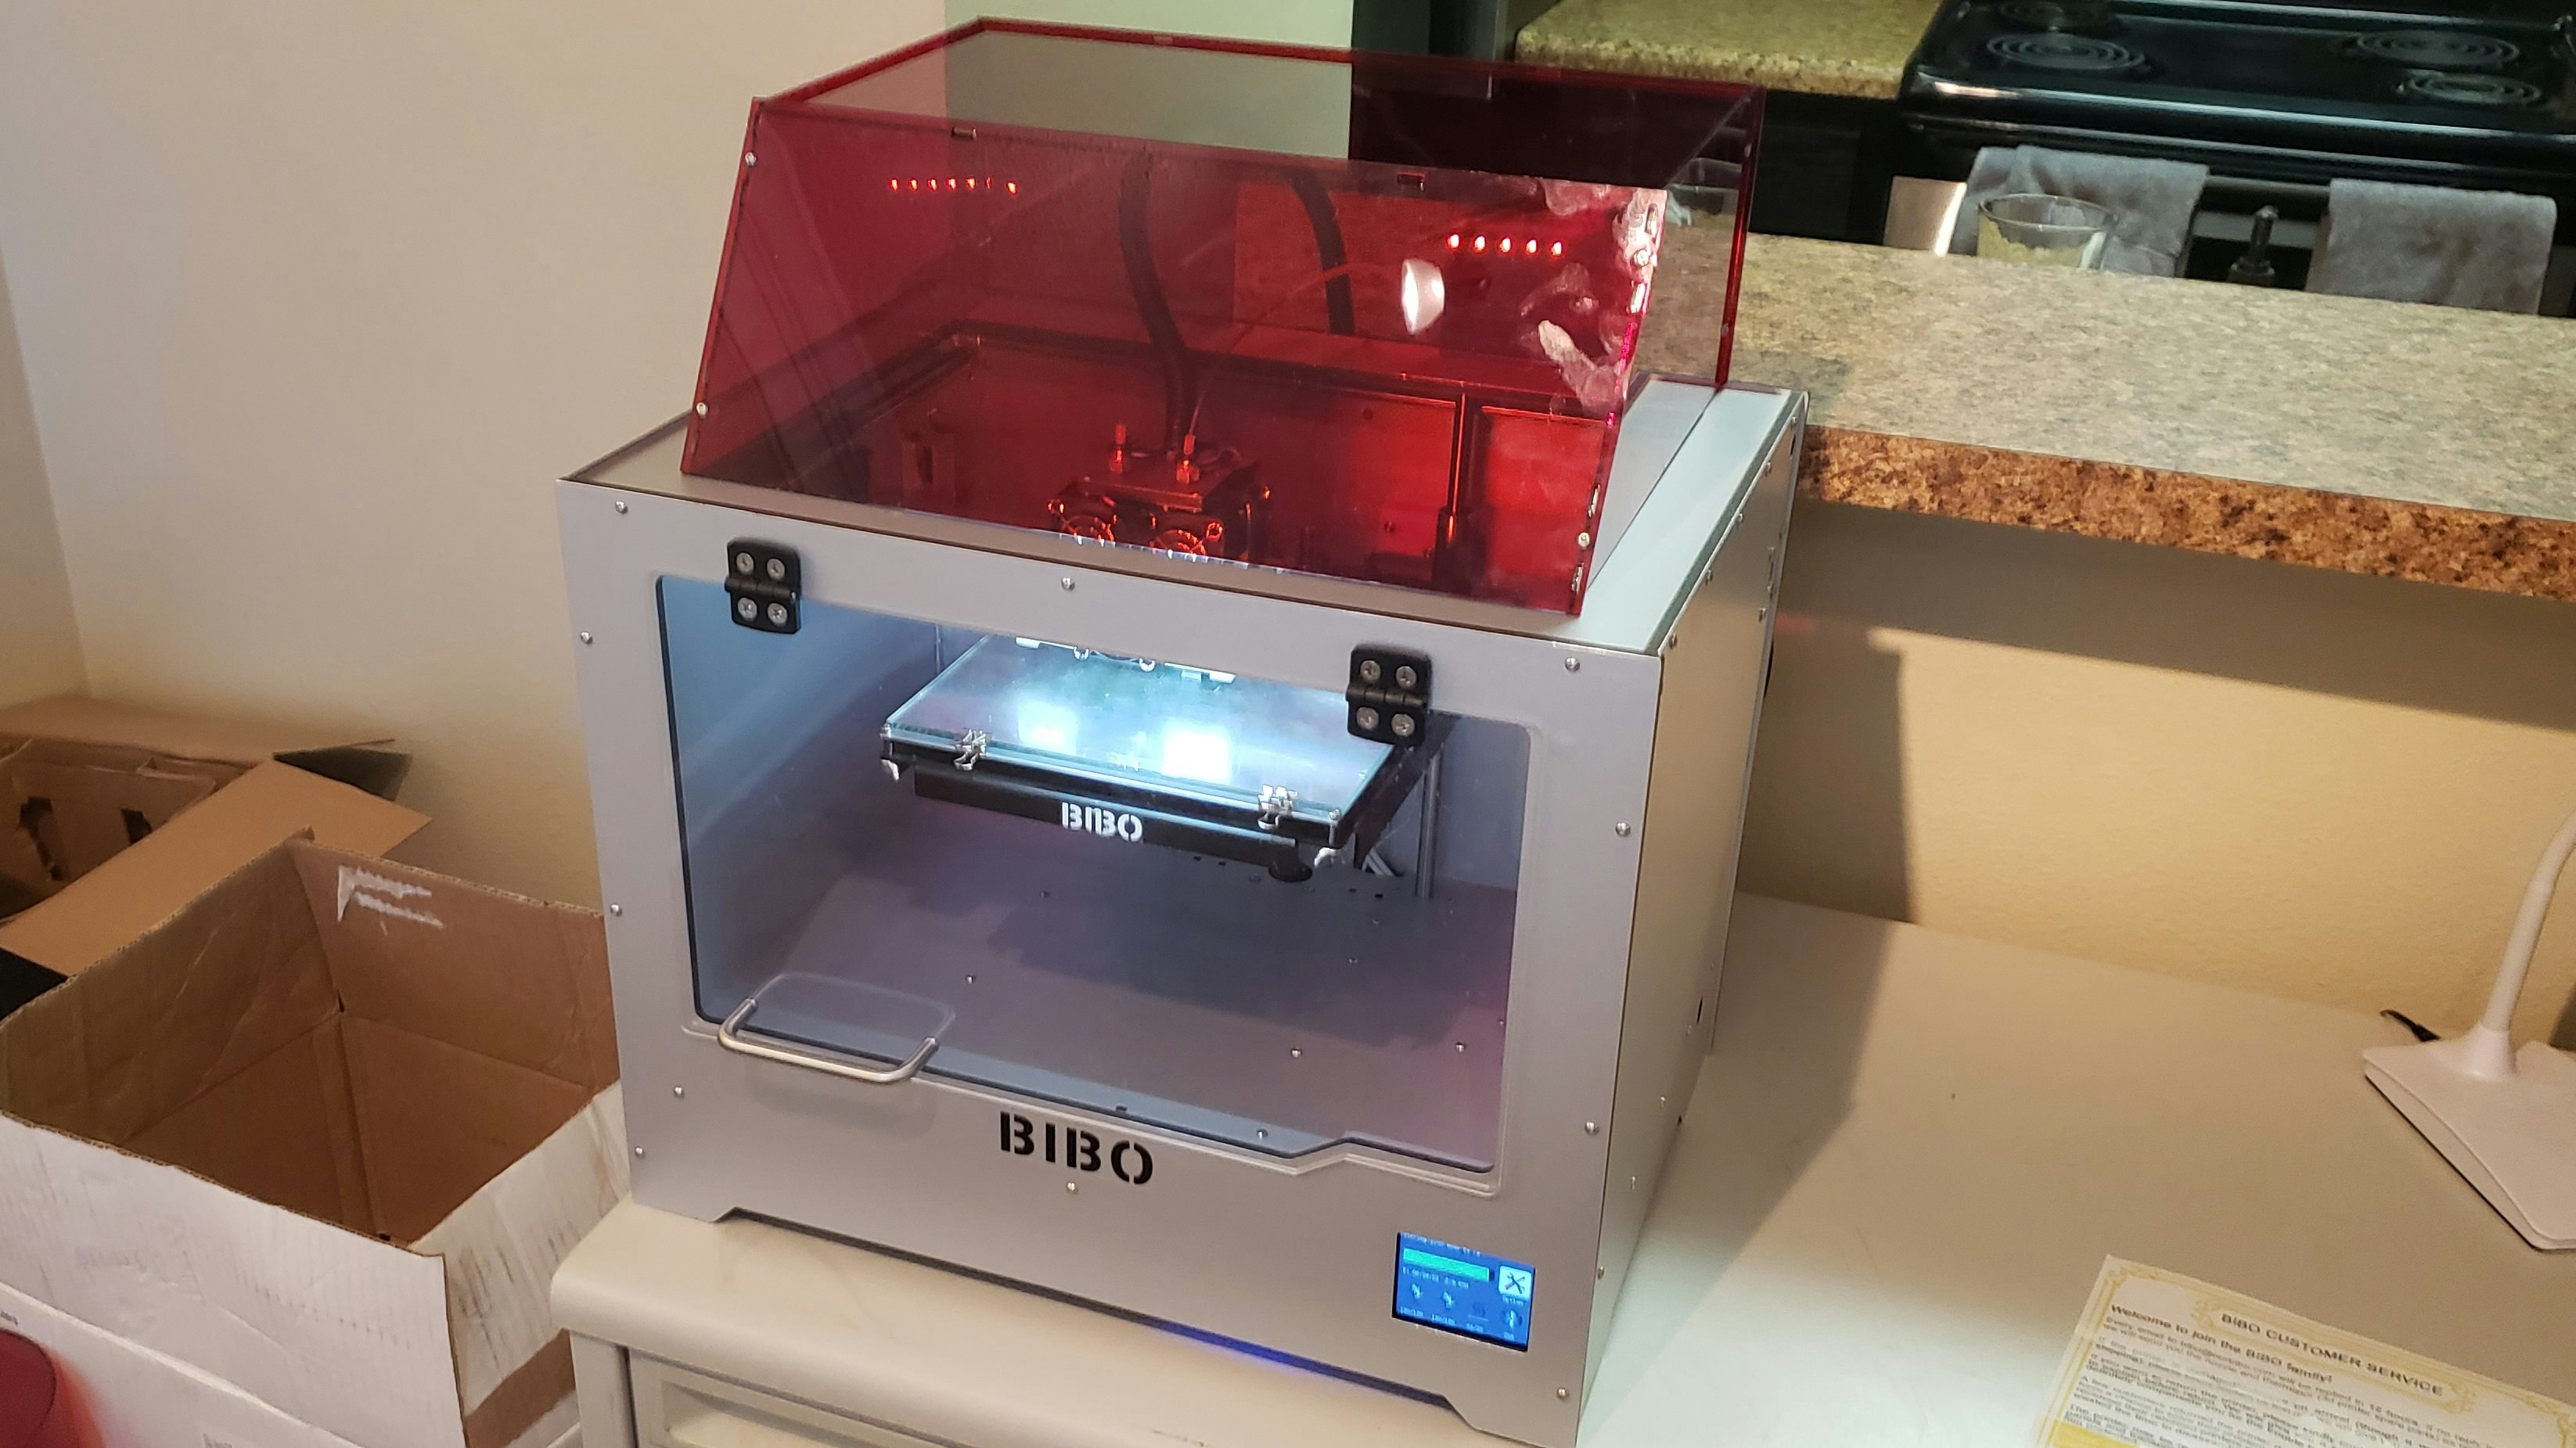 Review: BIBO Dual-Extruder Printer — Does it Live Up the Hype? - Hackster.io